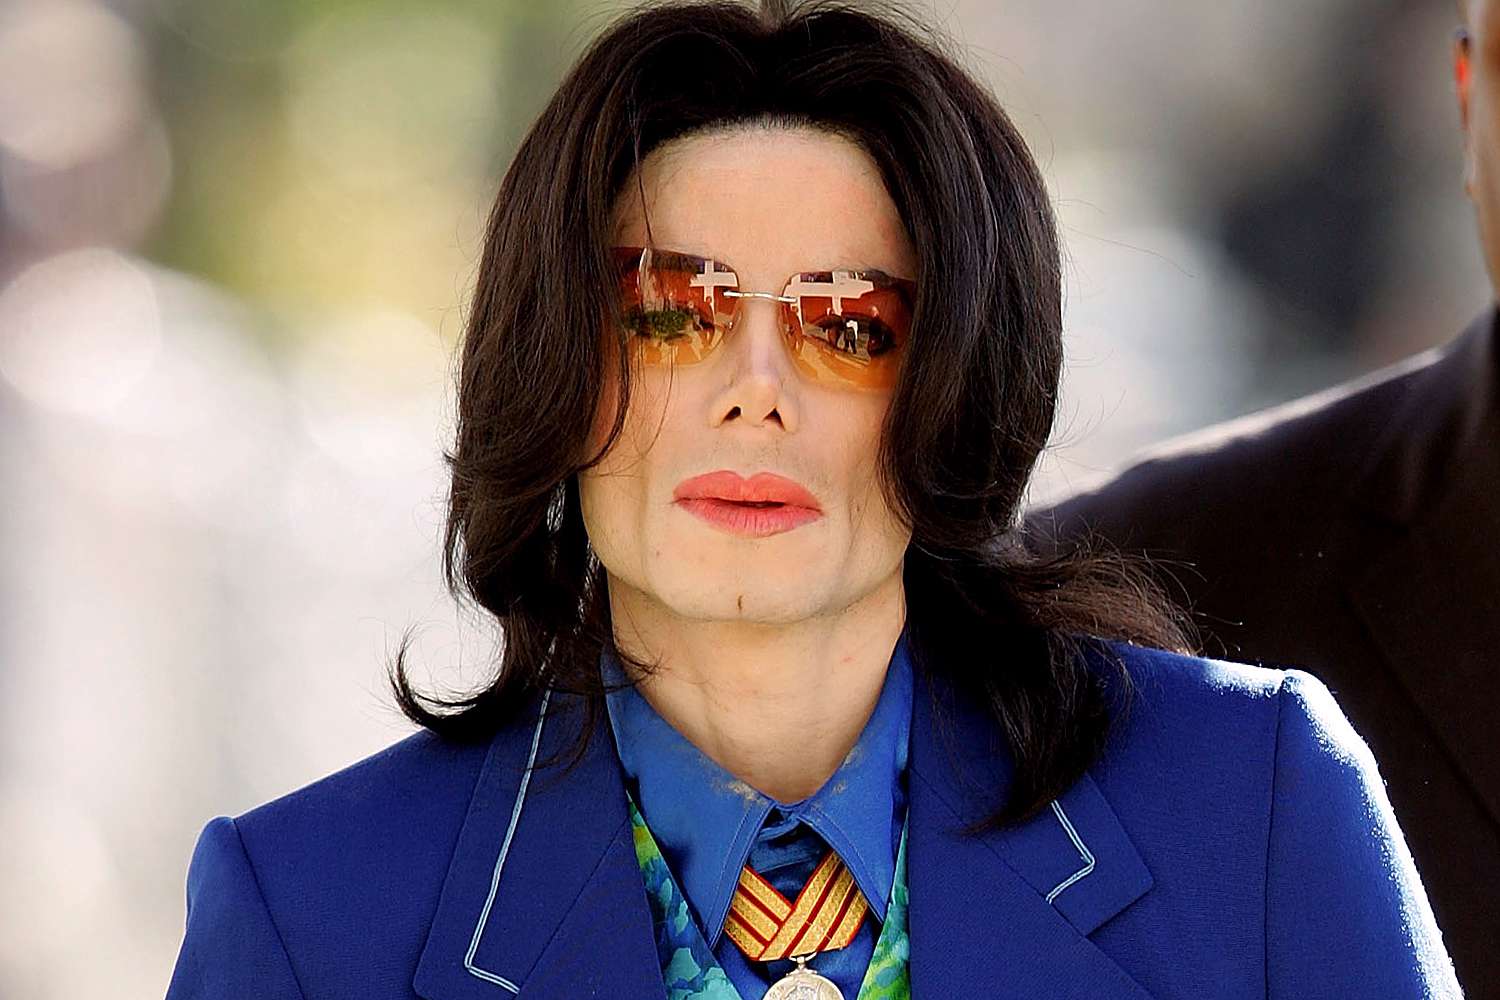 Singer Michael Jackson arrives at Santa Maria Superior Court before testimony in his child molestation trial March 16, 2005 in Santa Maria, California. Jackson is charged in a 10-count indictment with molesting a boy, plying him with liquor and conspiring to commit child abduction, false imprisonment and extortion. He has pleaded innocent. 